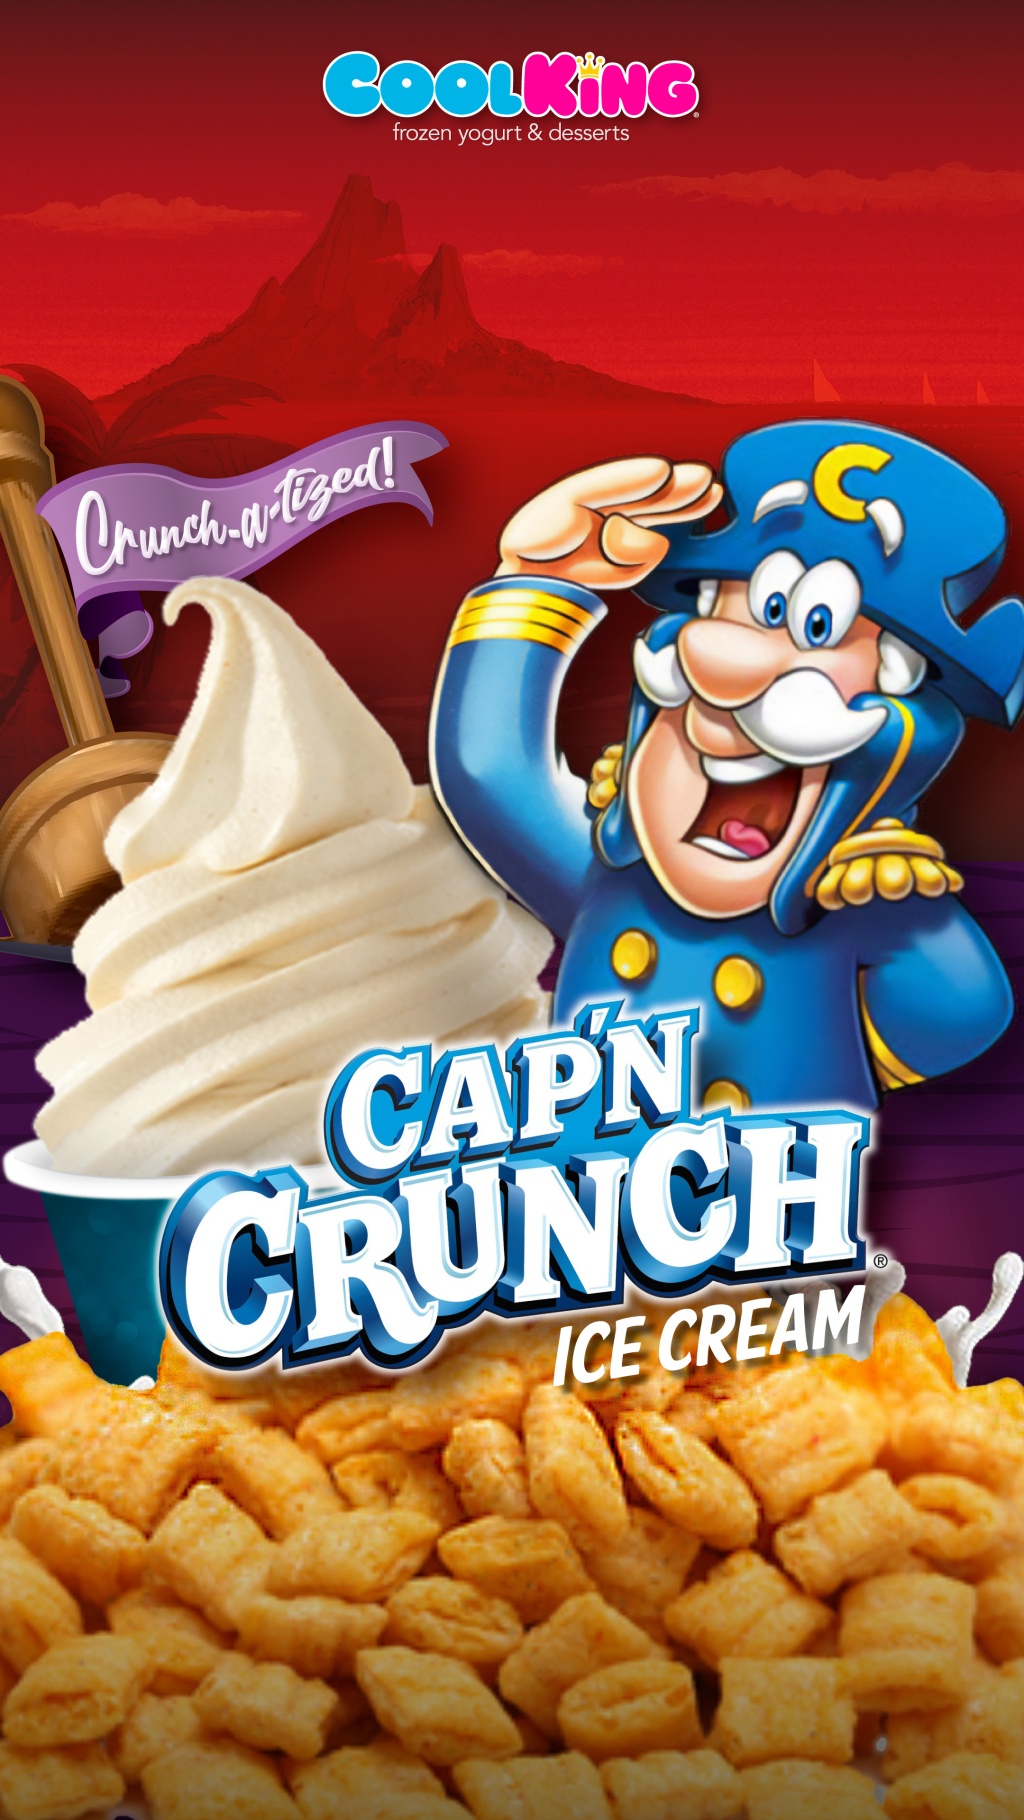 “Cap’n Crunch Ice Cream” Motion Graphic and Flavor Card for Cool King®